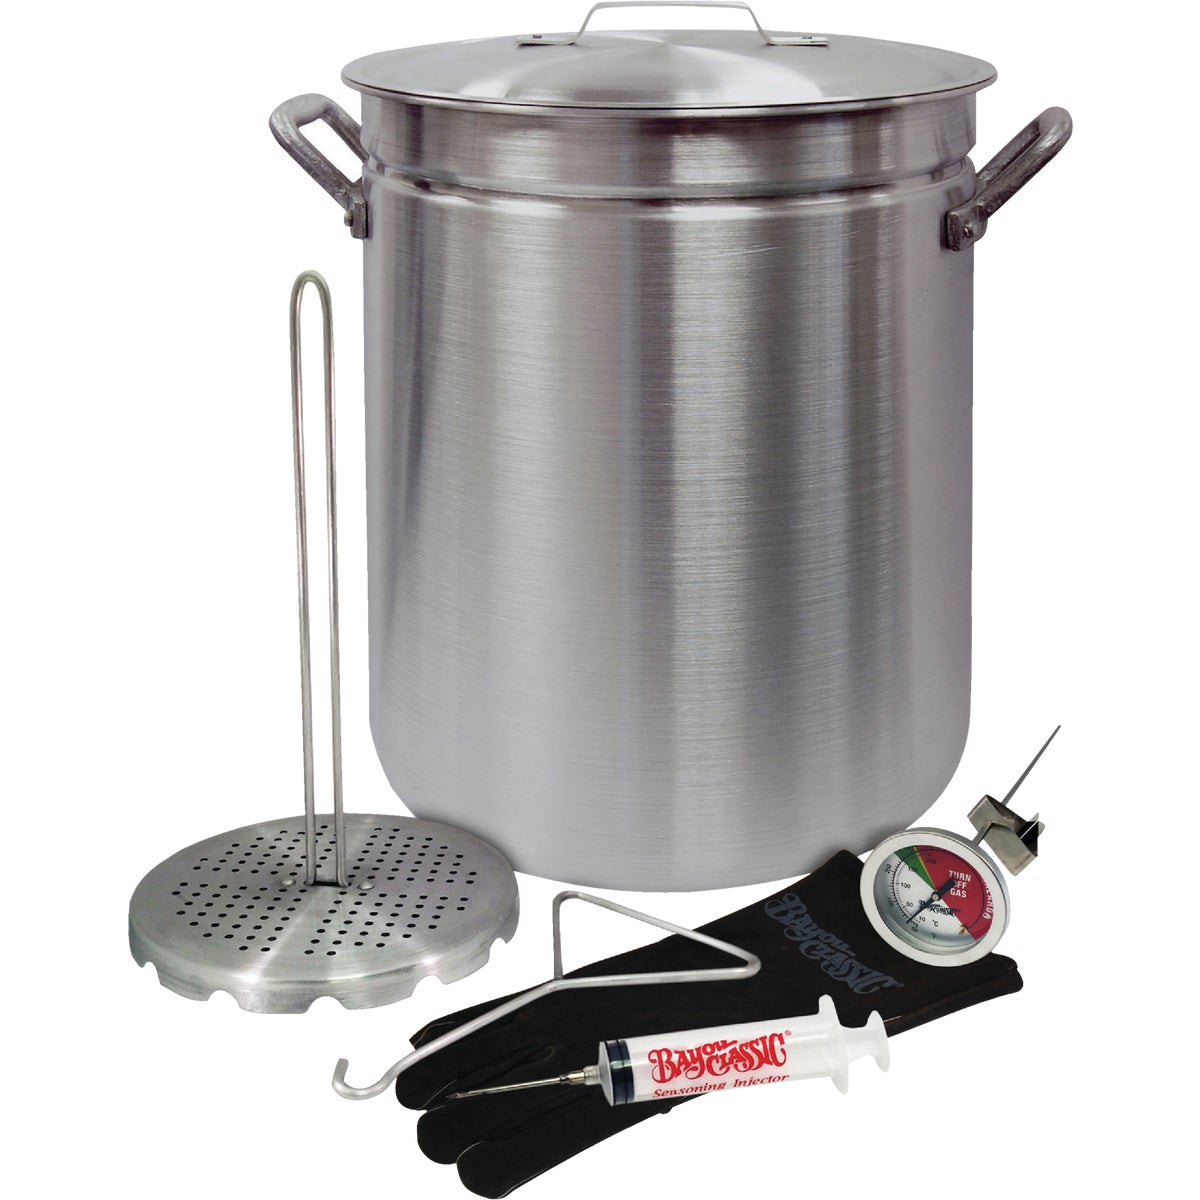 Item 801897, Aluminum turkey fryer is specifically designed to fry large turkeys up to 